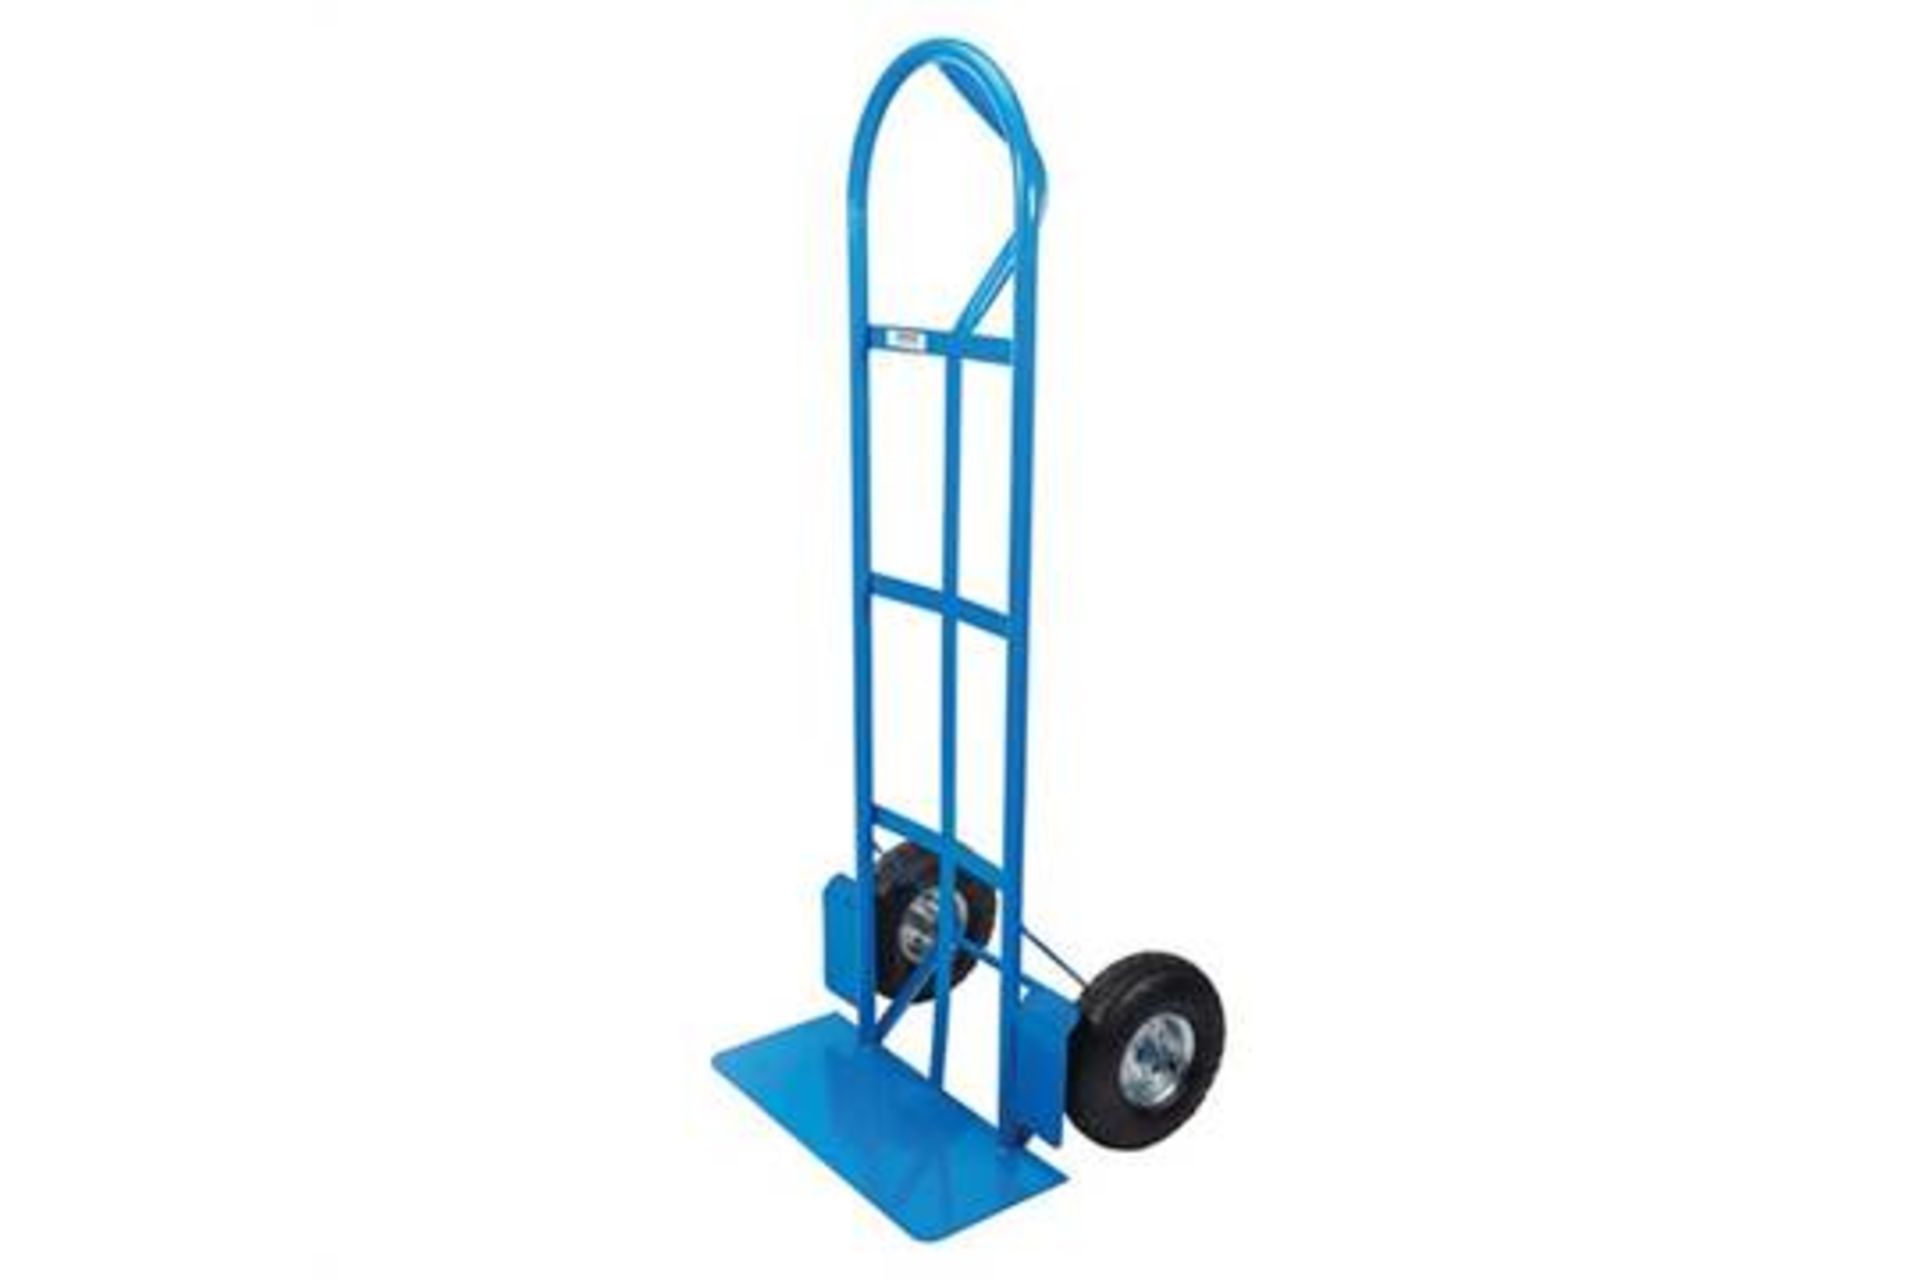 1 x Silverline 250kg Porters Sack Truck - Ideal for Tough, Daily Use in Warehouses, Offices & - Image 4 of 4